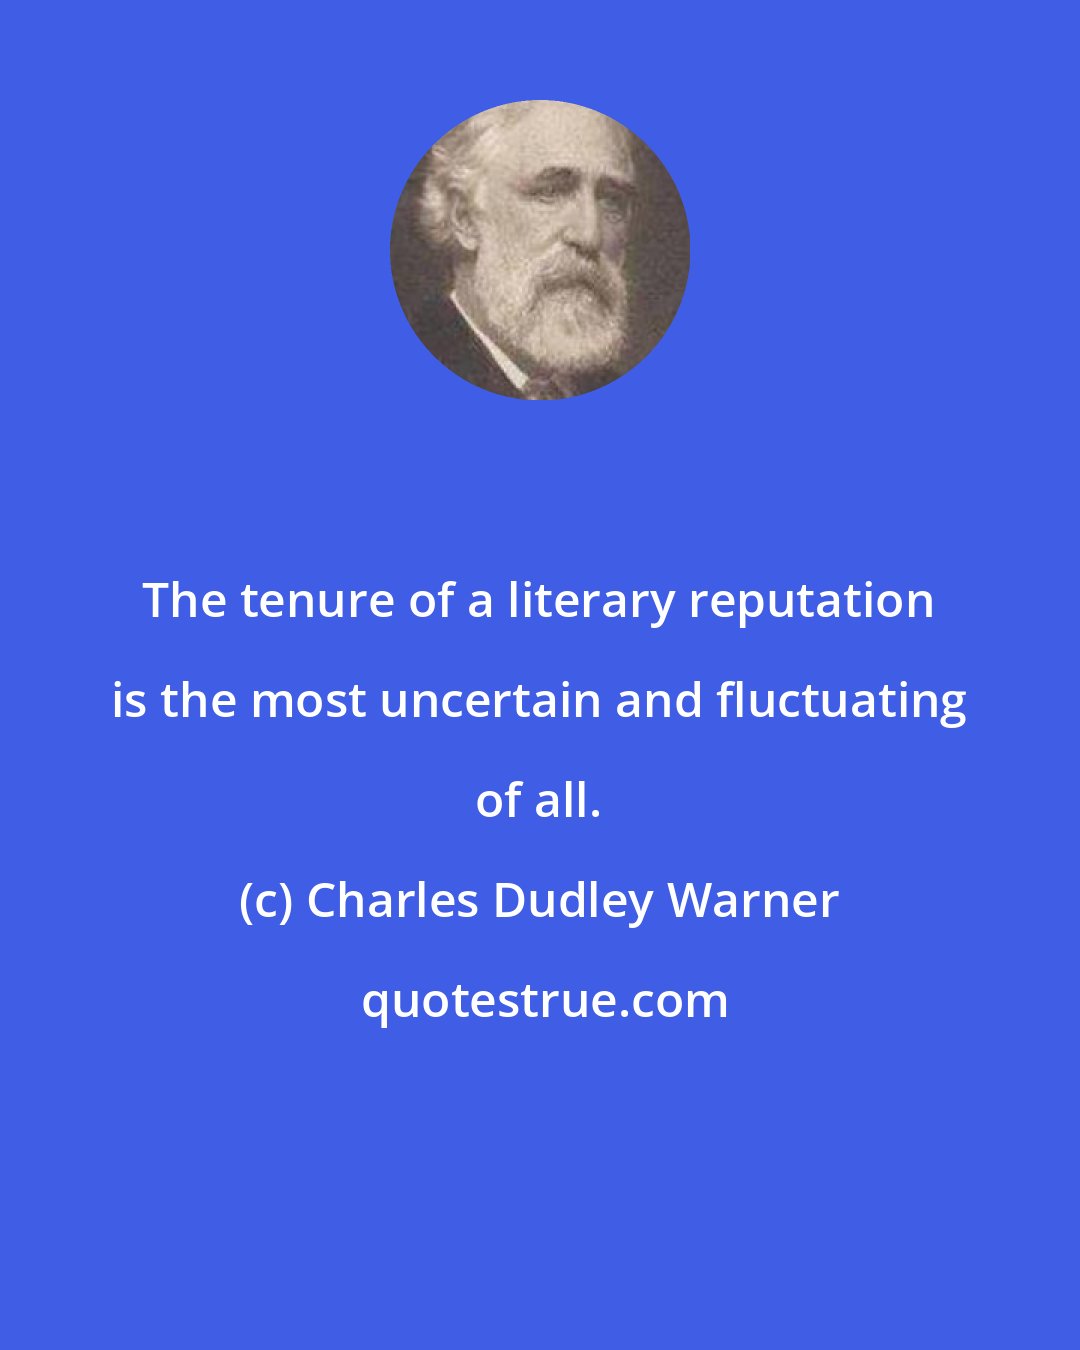 Charles Dudley Warner: The tenure of a literary reputation is the most uncertain and fluctuating of all.